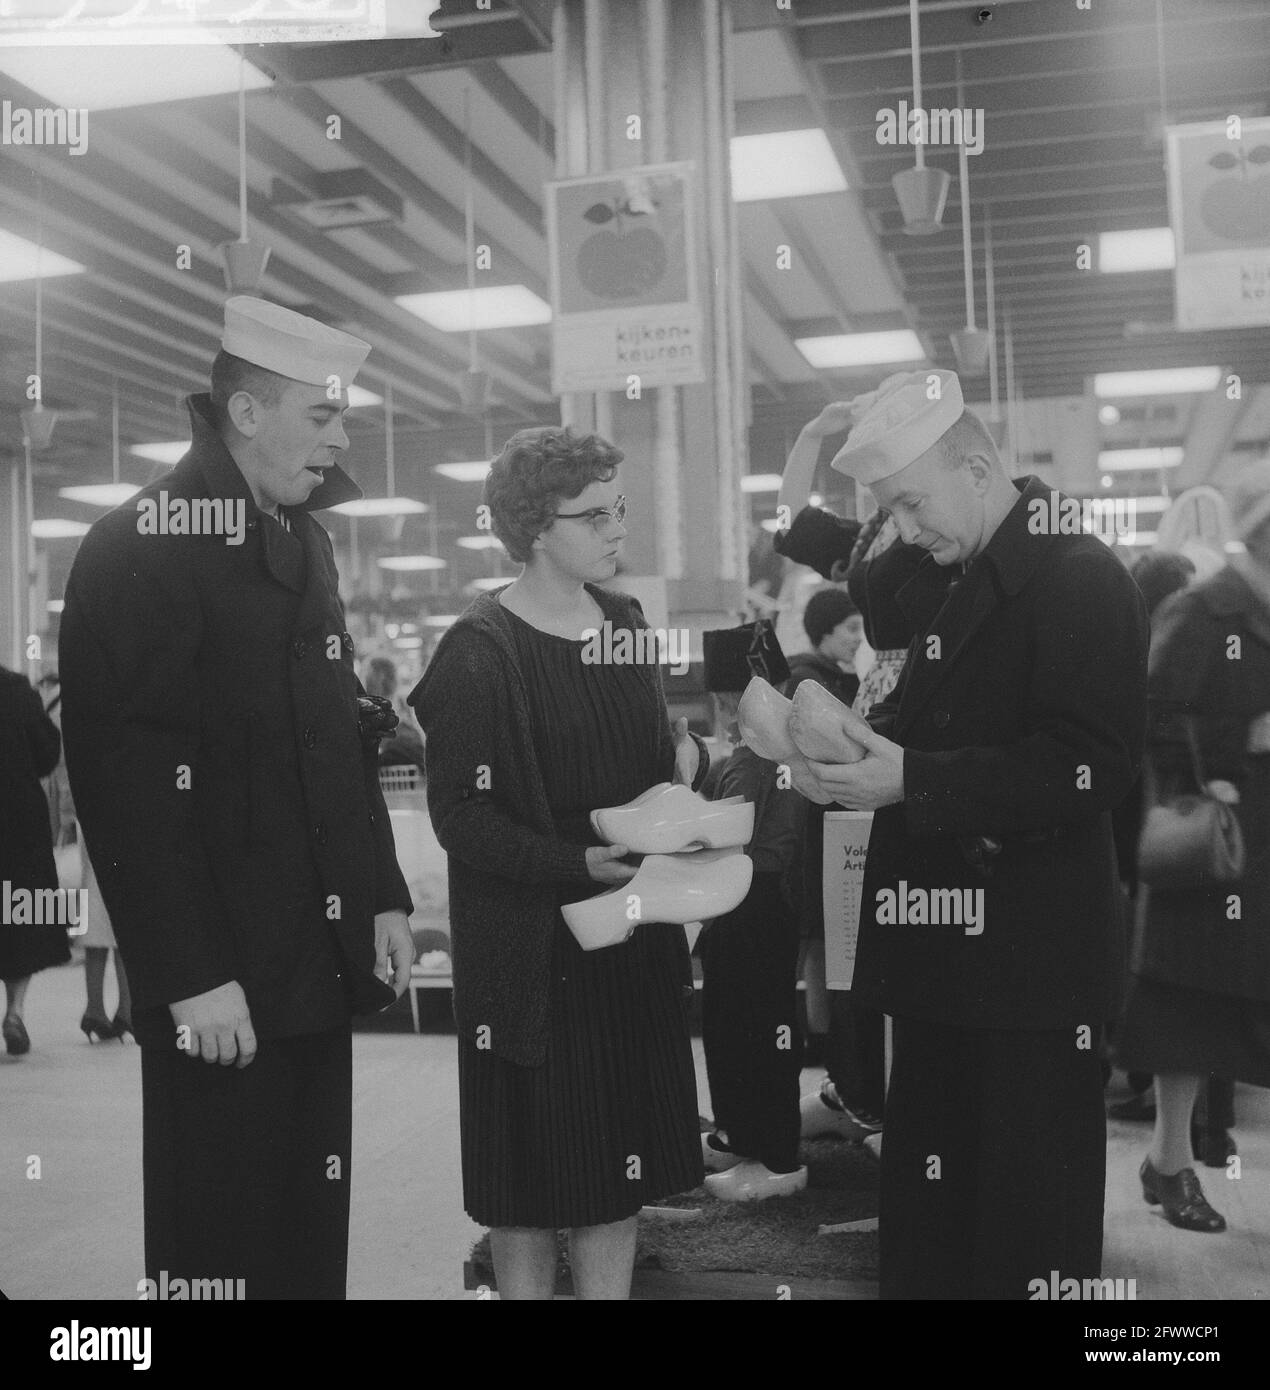 American sailors buy clogs in Rotterdam, December 22, 1961, KLOMPEN, The Netherlands, 20th century press agency photo, news to remember, documentary, historic photography 1945-1990, visual stories, human history of the Twentieth Century, capturing moments in time Stock Photo